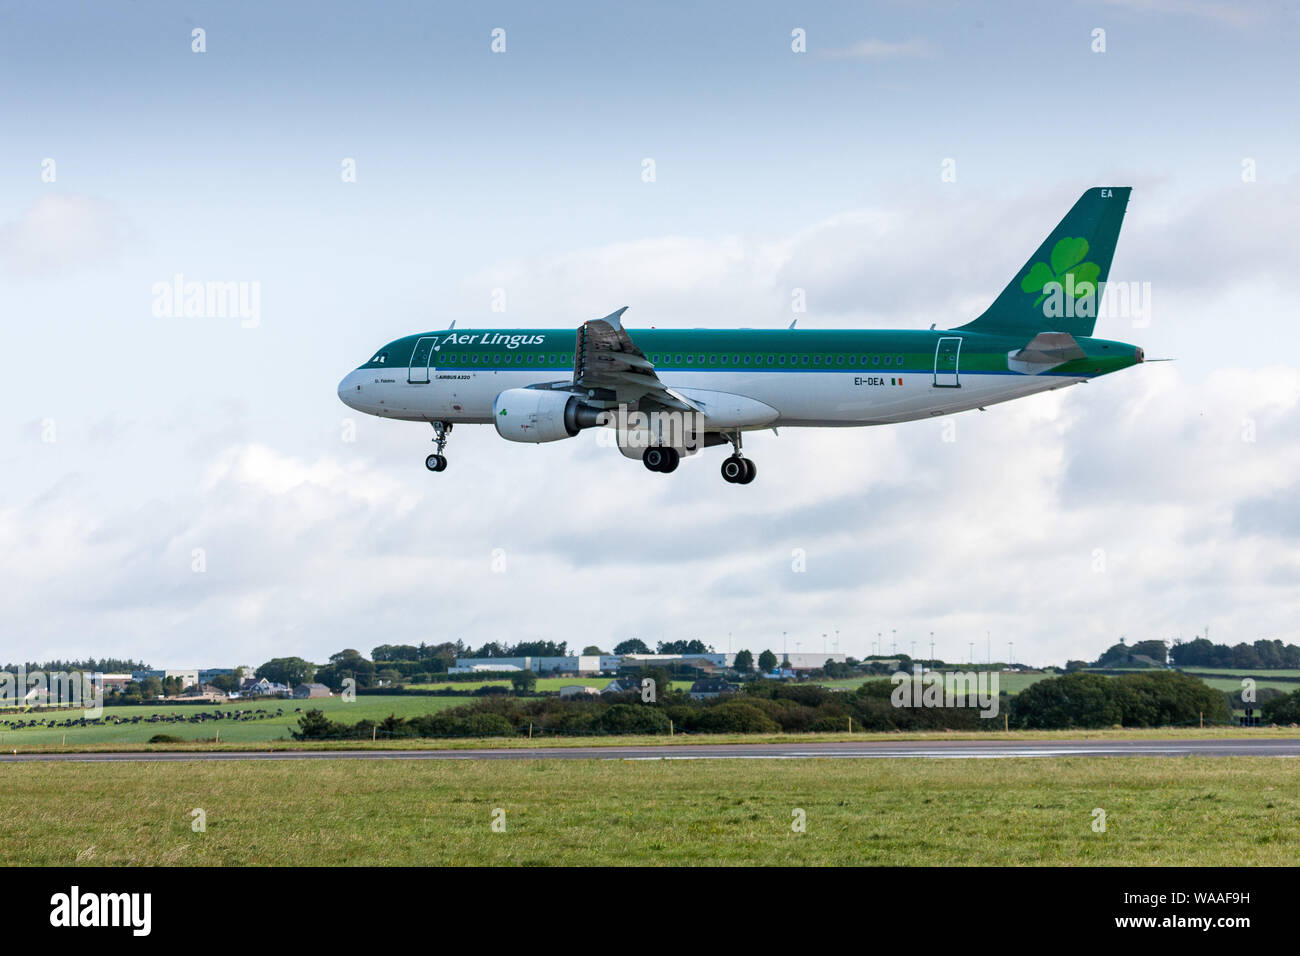 Cork Airport, Cork, Ireland. 19th August, 2019.  An Aer Lingus Airbus A320 aircraft about to land after its short flight from Amsterdam into Cork Airp Stock Photo